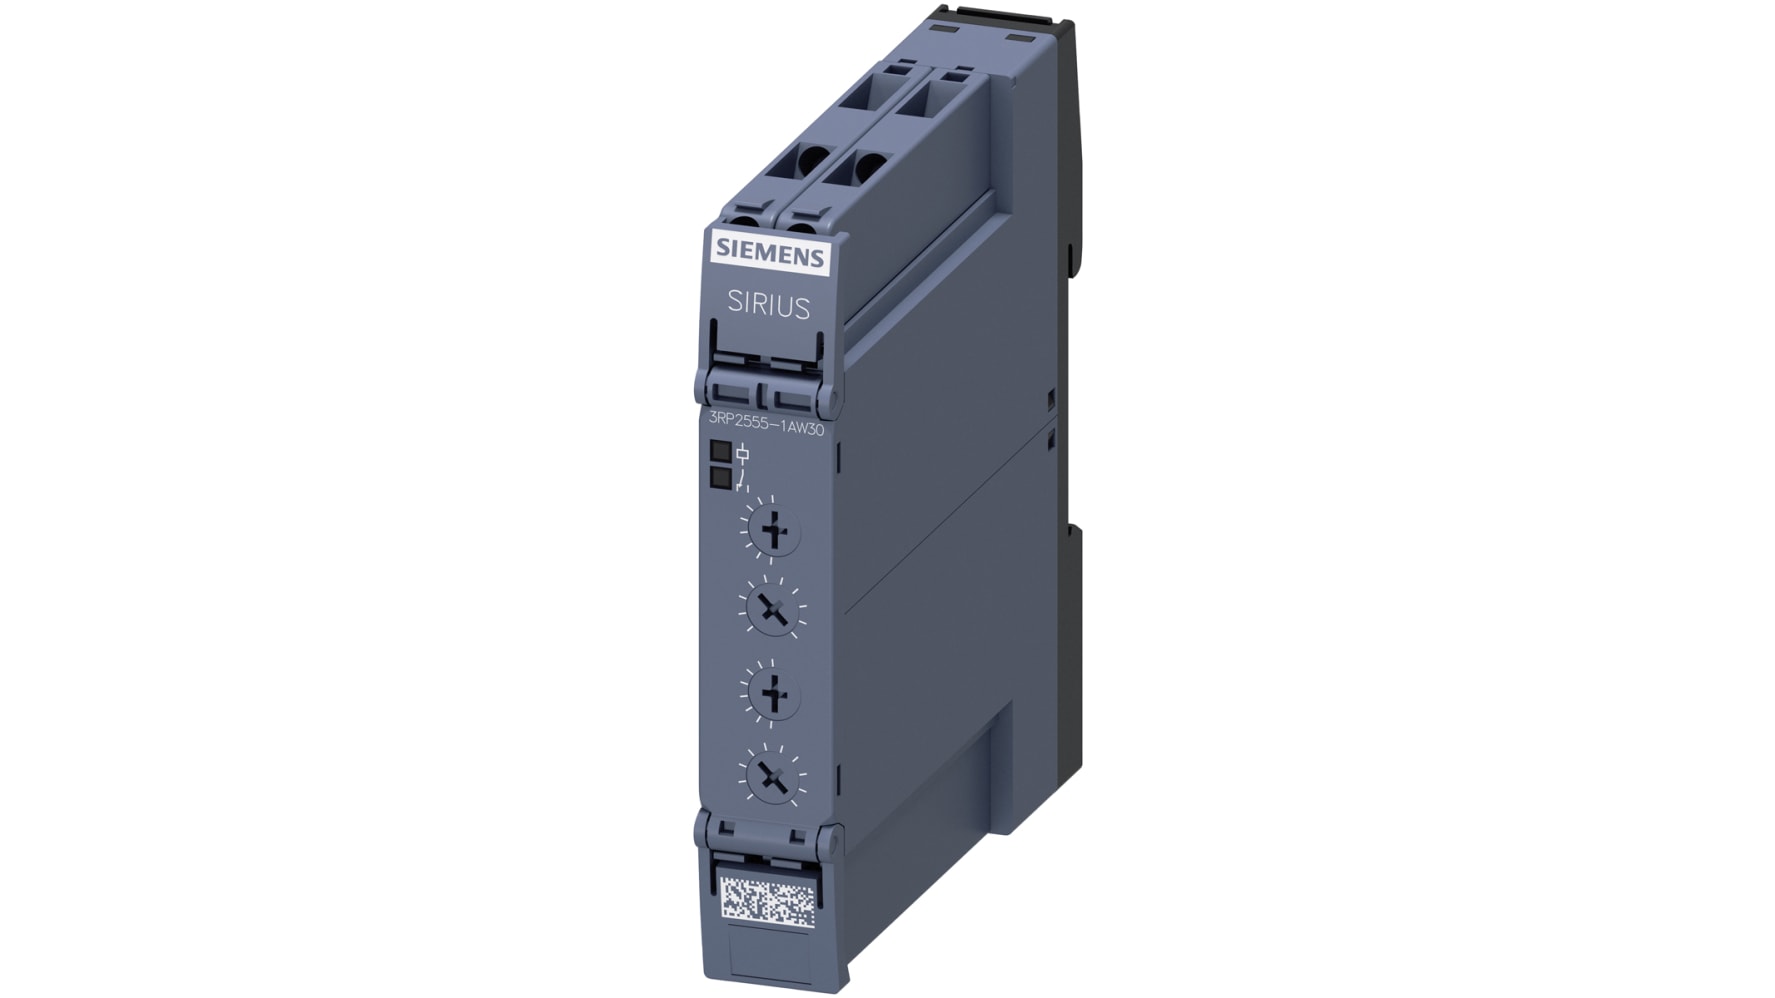 SIEMENS Timer Relay 3RP2555-1AW30